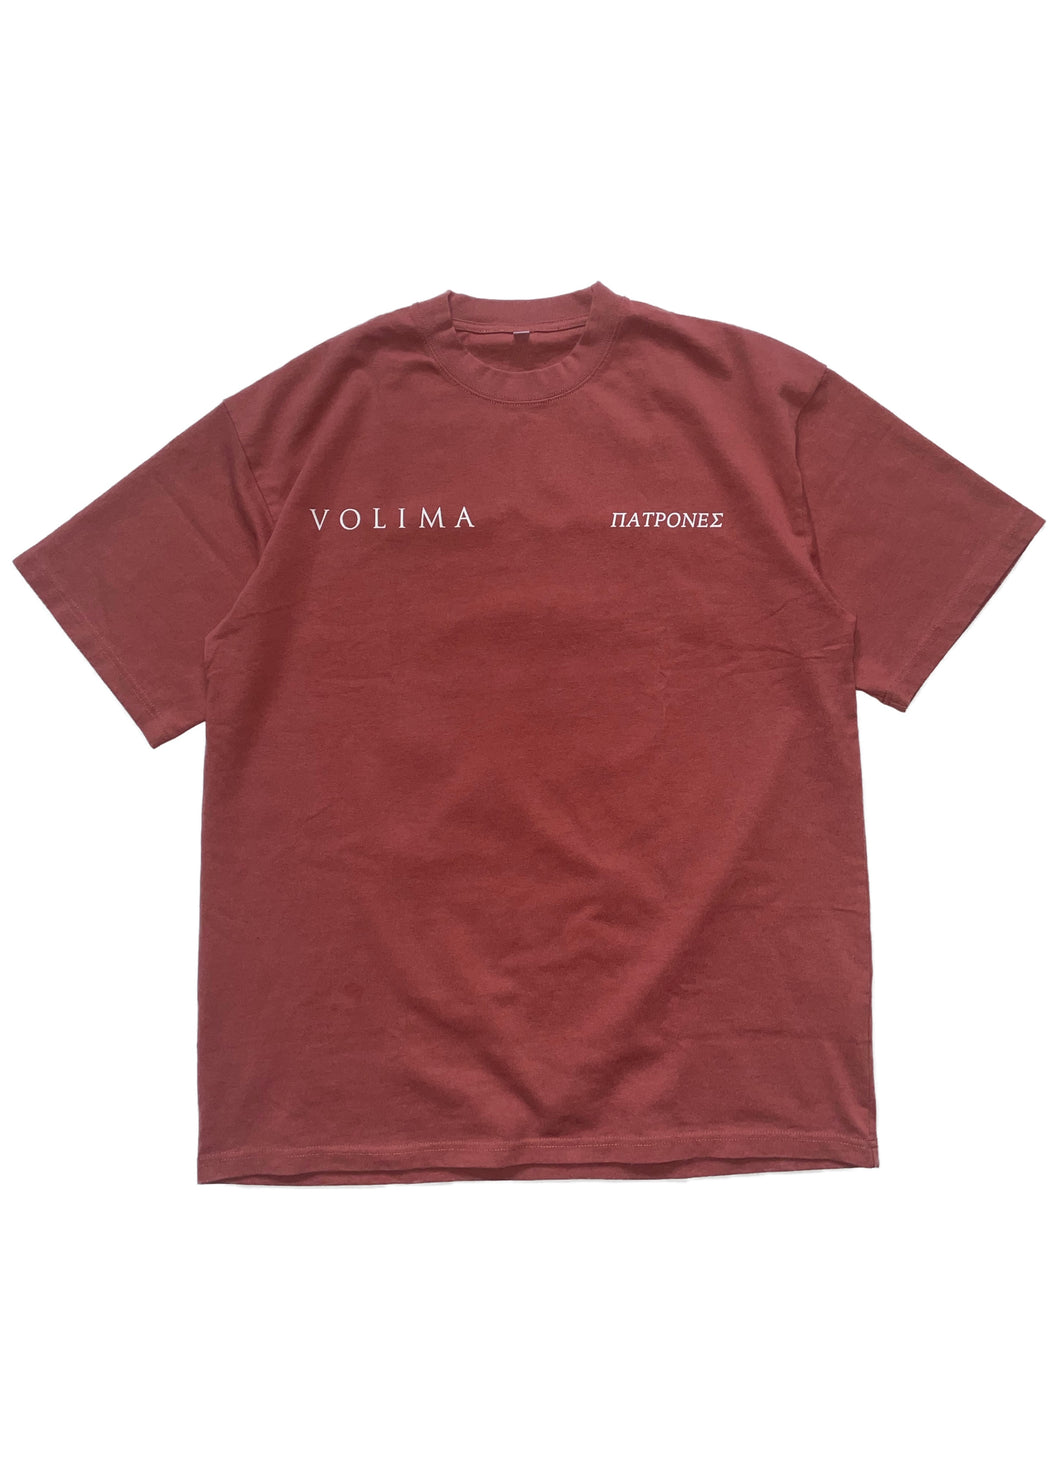 VOLIMA PATRON T-SHIRT - WASHED RED